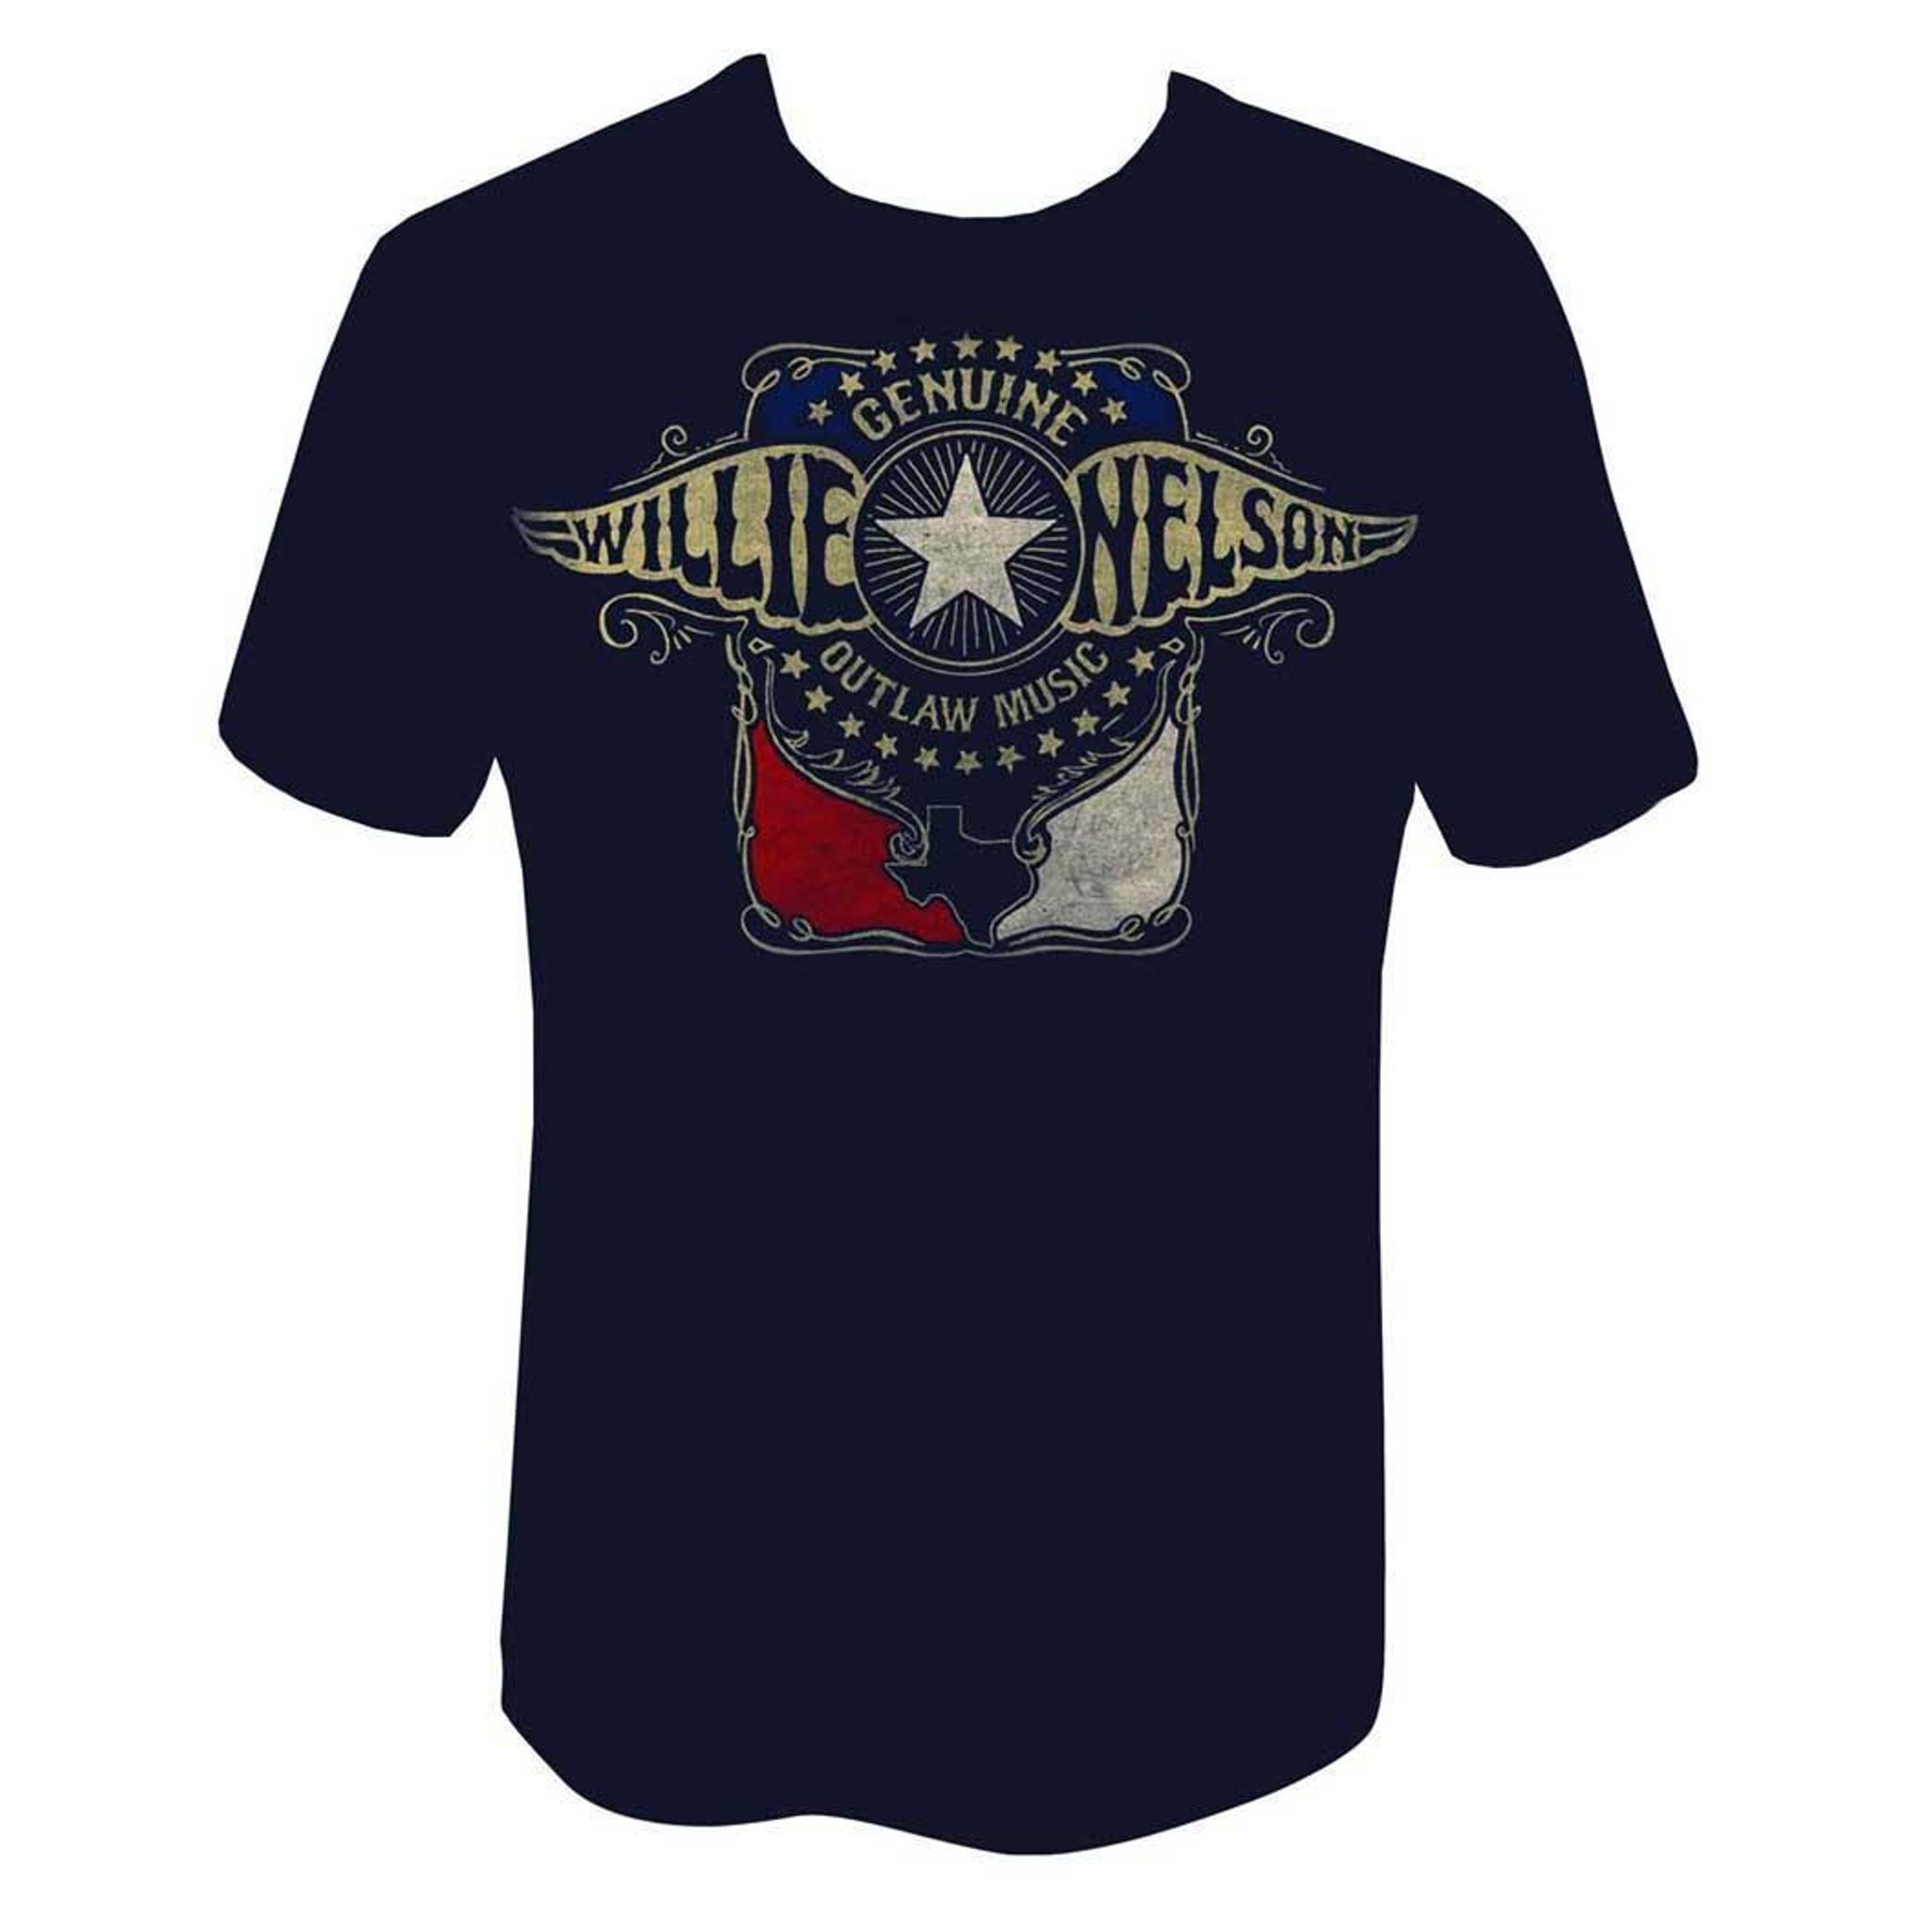 Willie Nelson Outlaw Wings T-Shirt